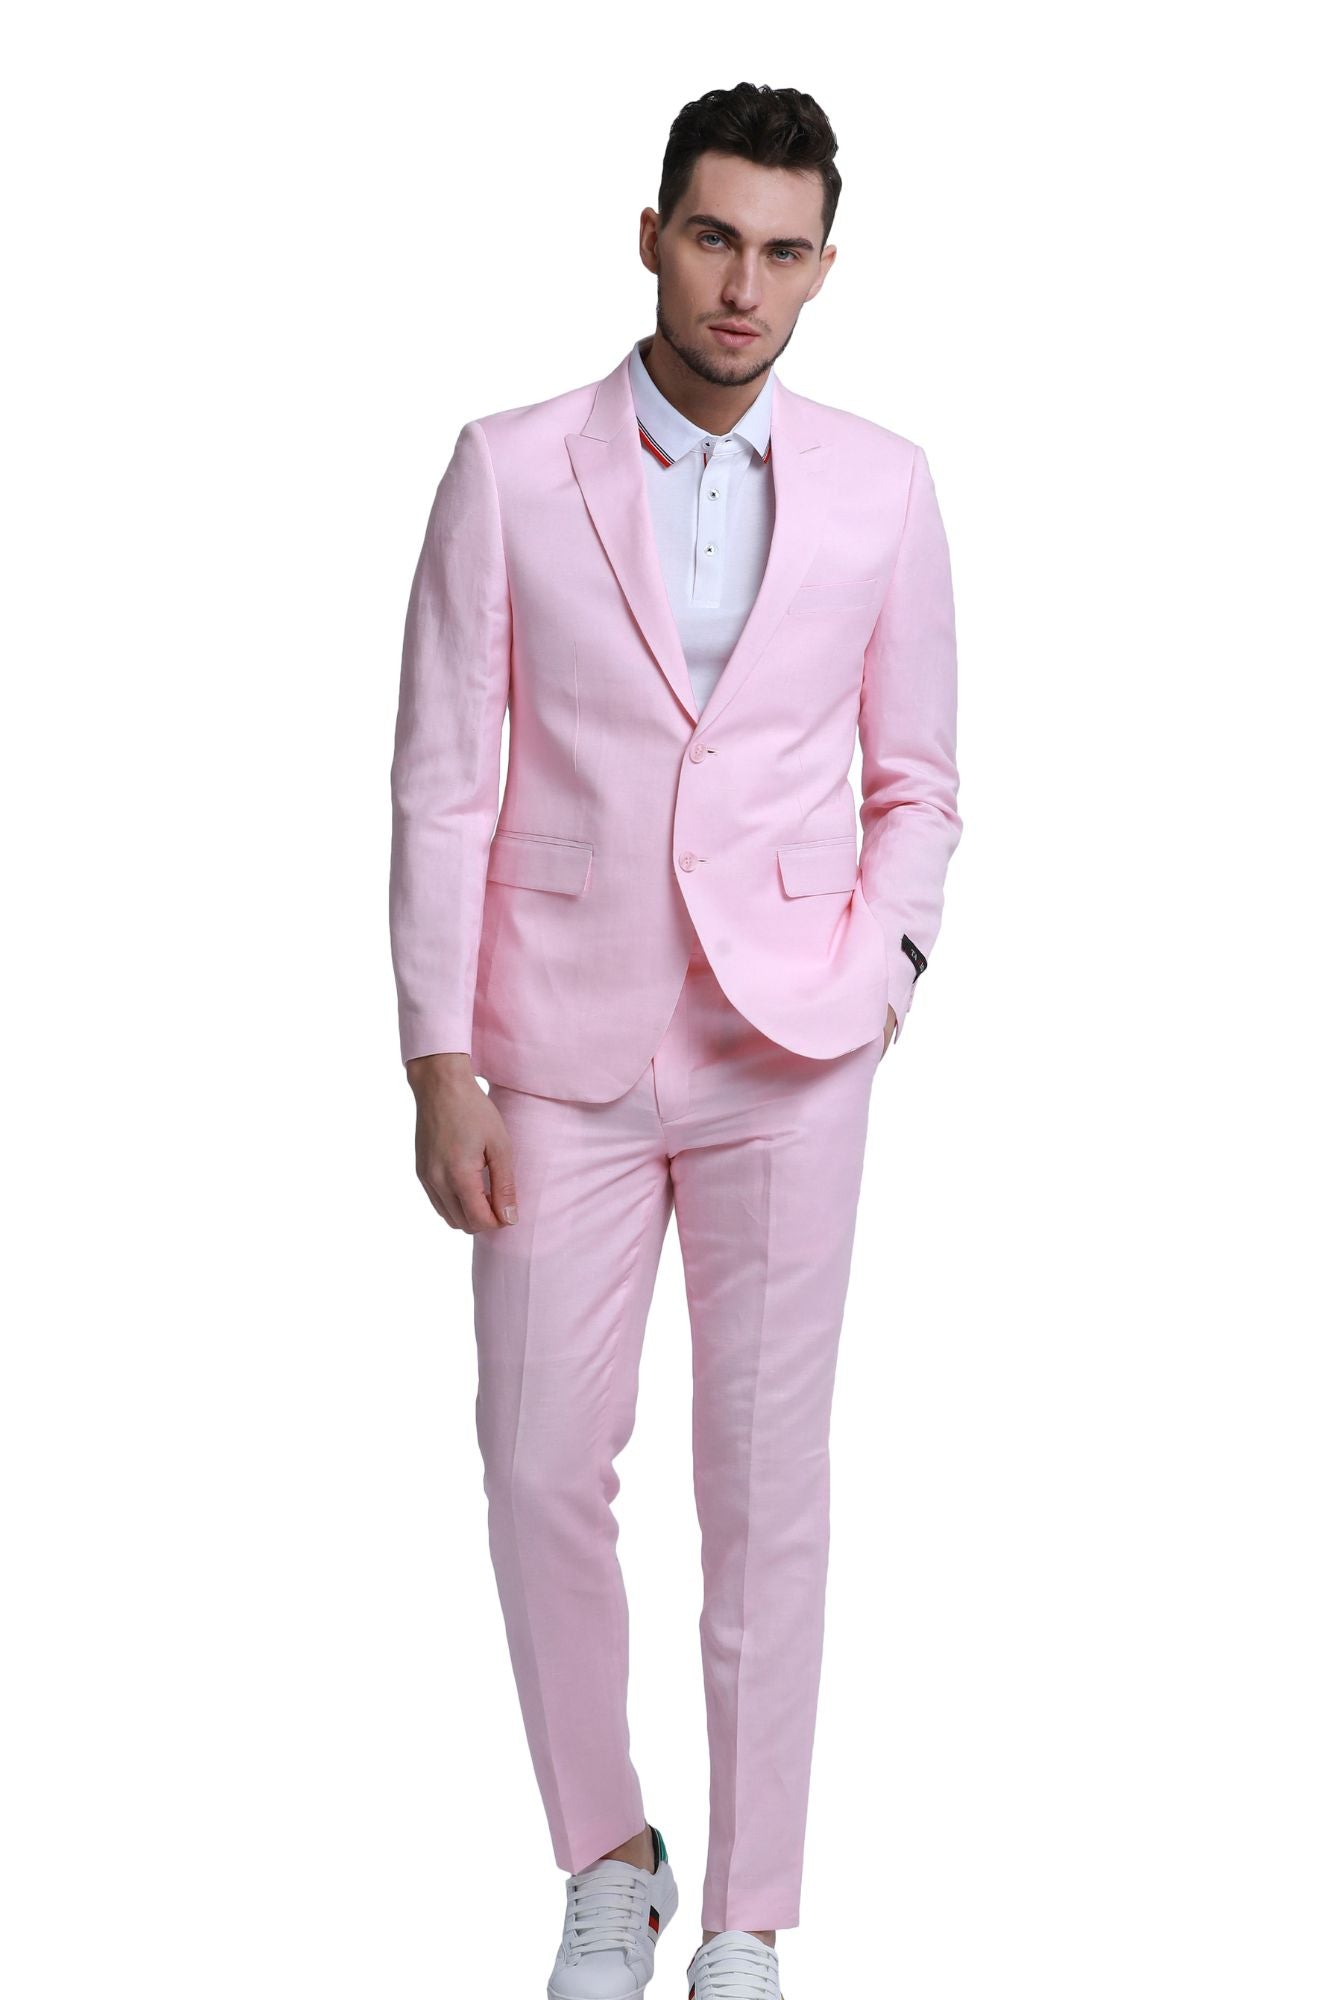 Buy Arrow Men Pink Tailored Fit Three Piece Formal Suit at Amazon.in